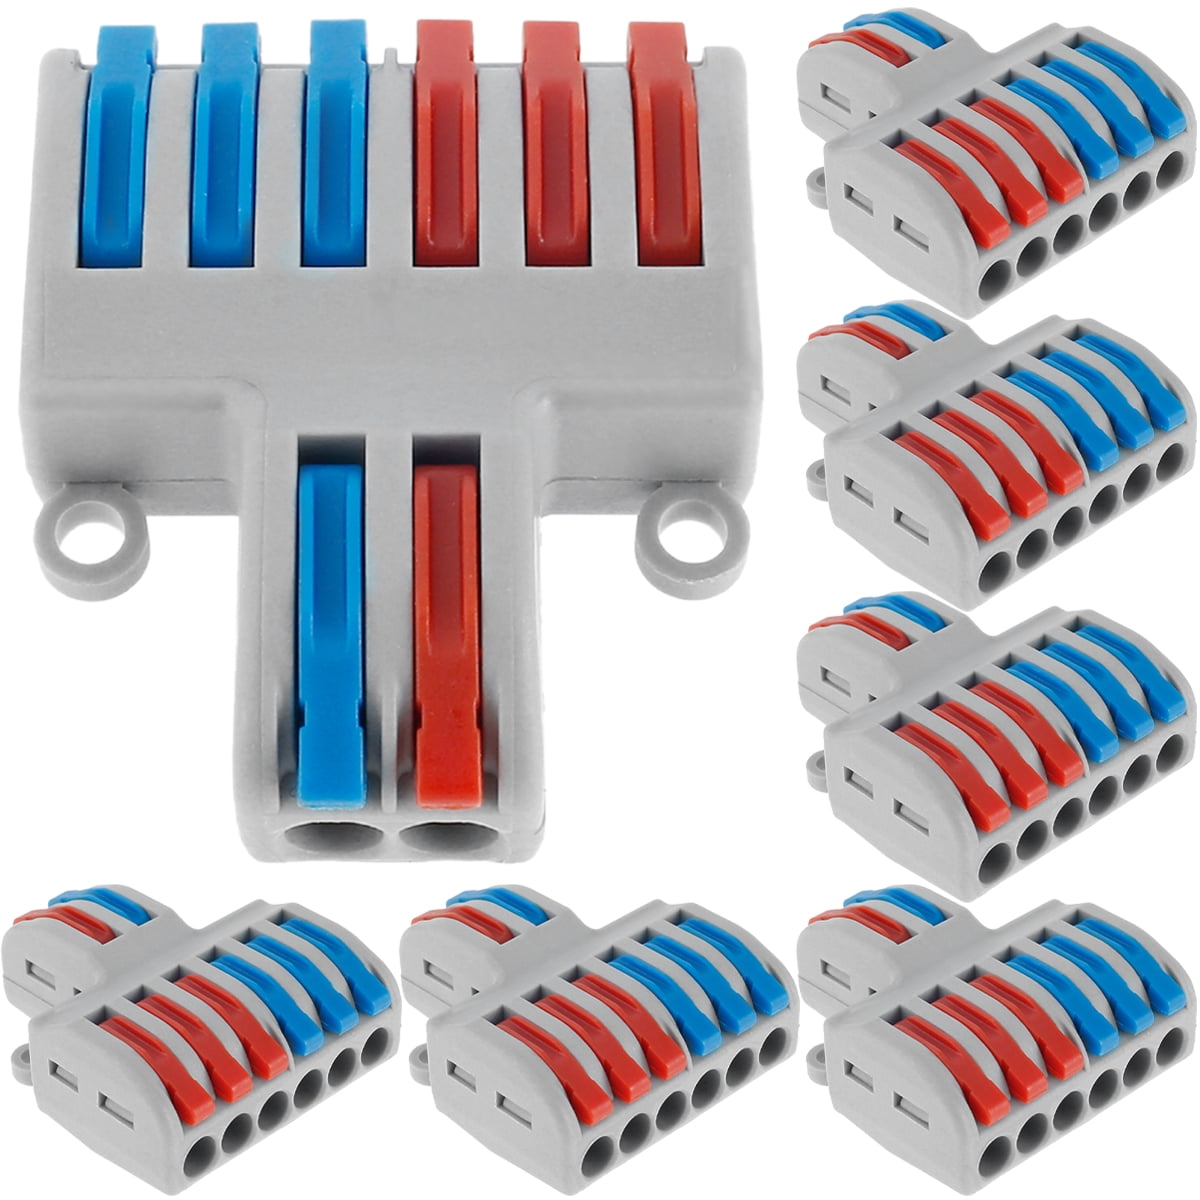 60 Pk Assrtd wago Style Lever Nuts Splicing Connector Terminal Block Cage Clamp 